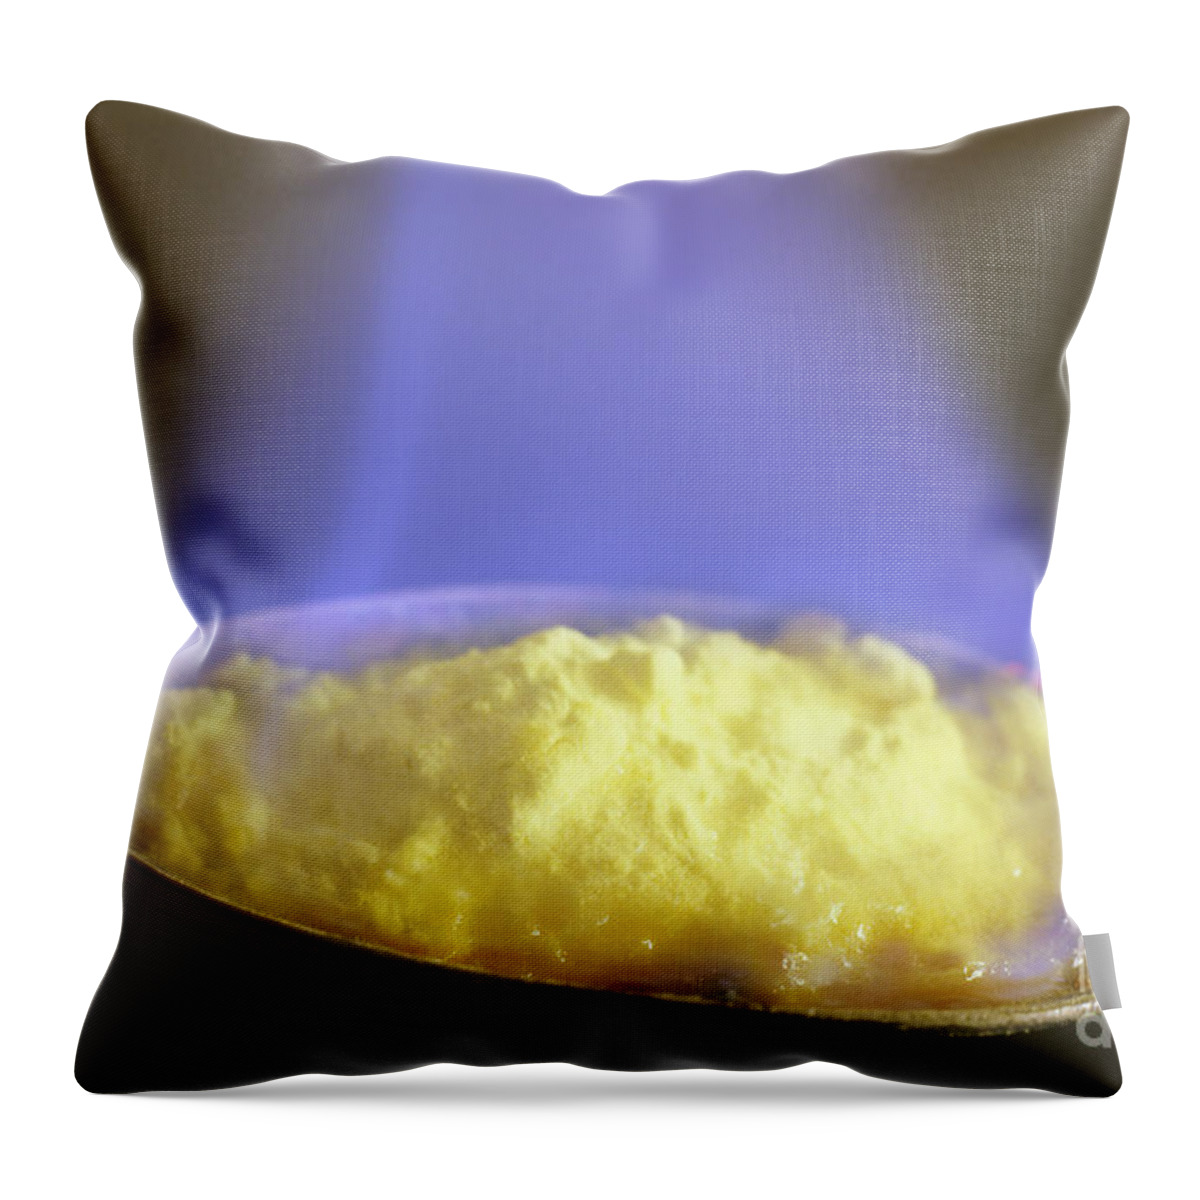 Burning Throw Pillow featuring the photograph Burning Sulfur by ER Degginger